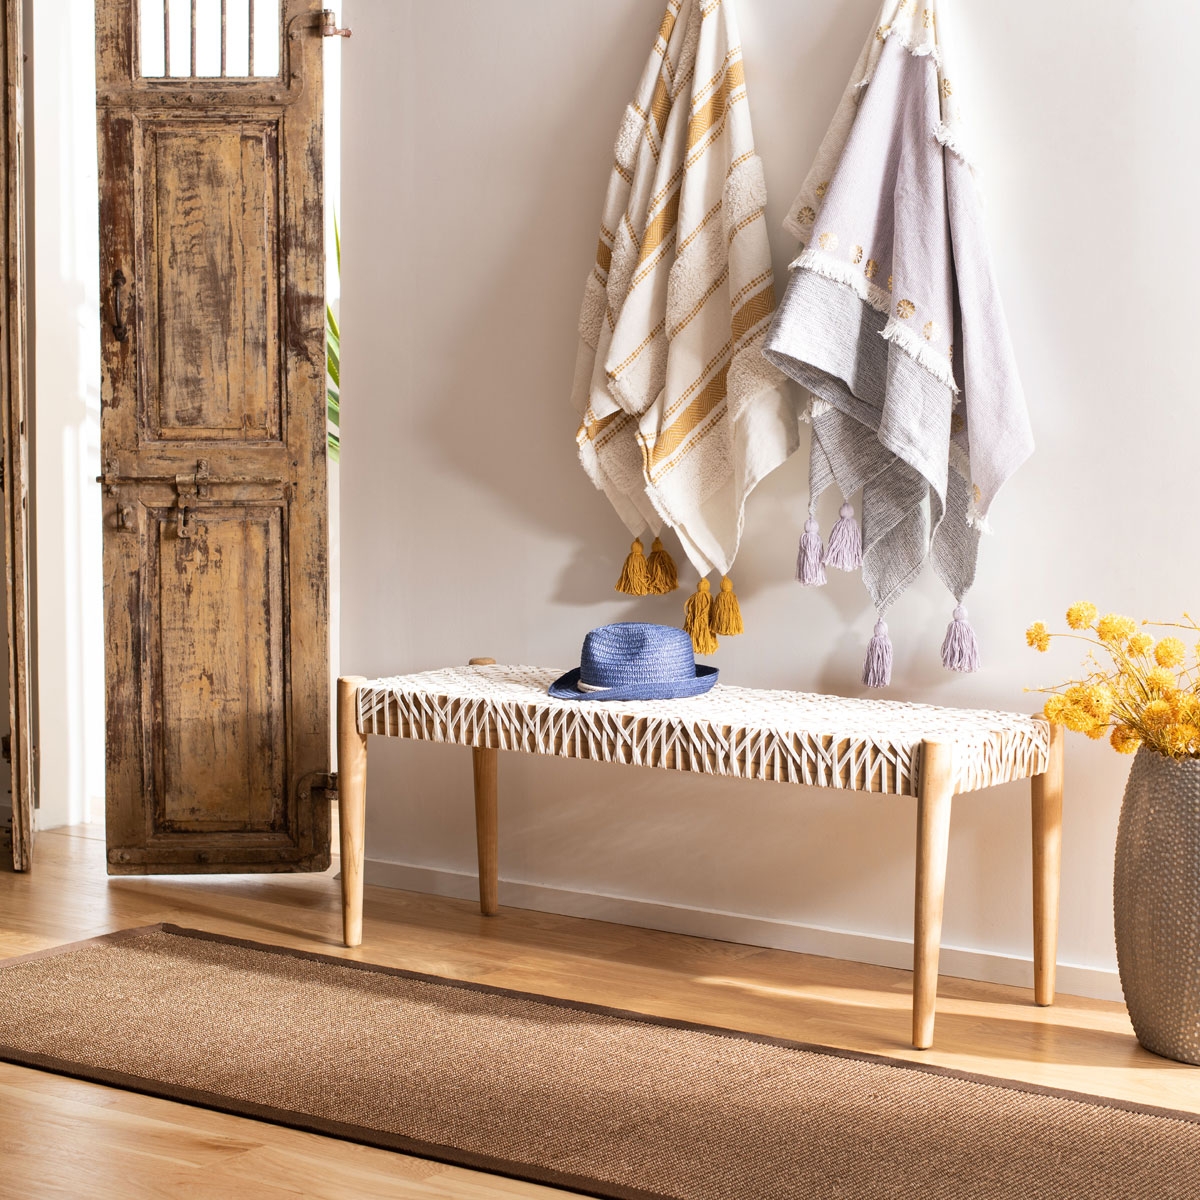 Bandelier Bench - Off White / Natural - Arlo Home - Image 2